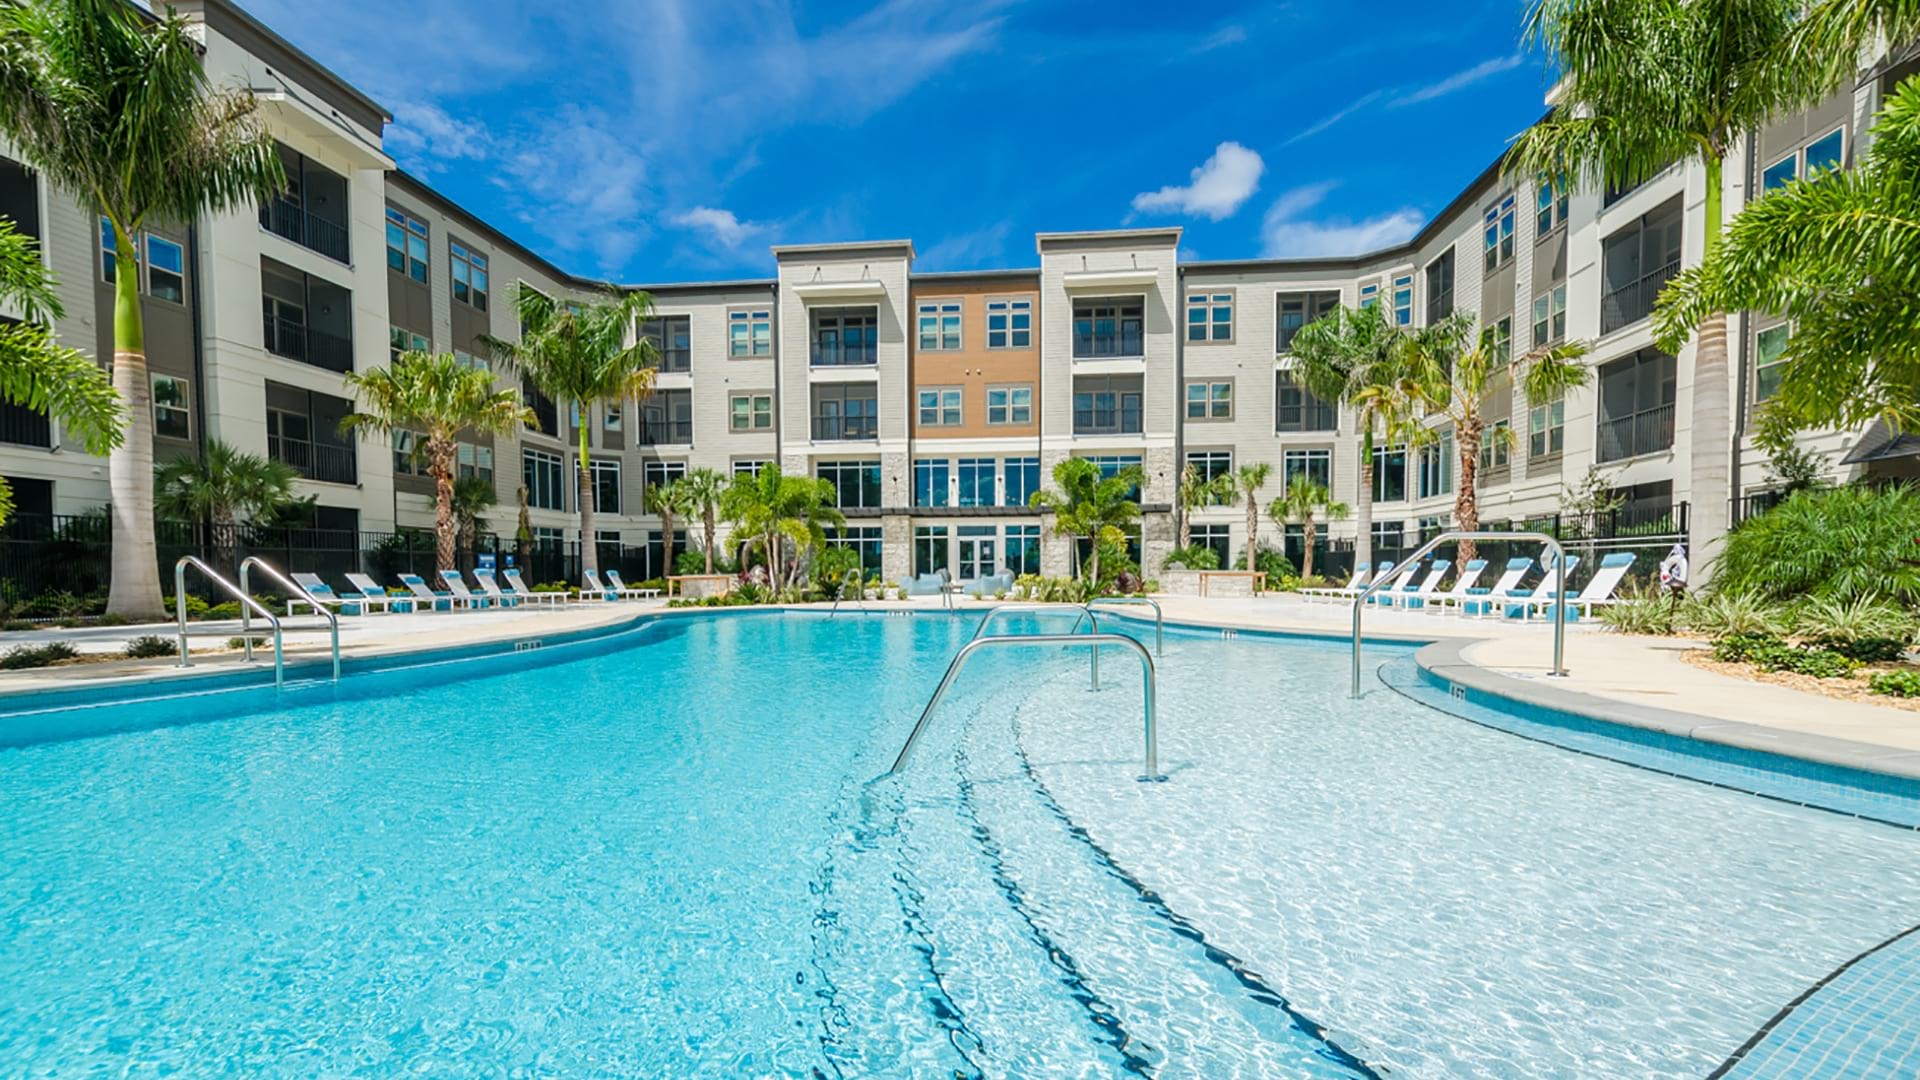 Spacious Resort-style pool at Our Pinellas Park apartments